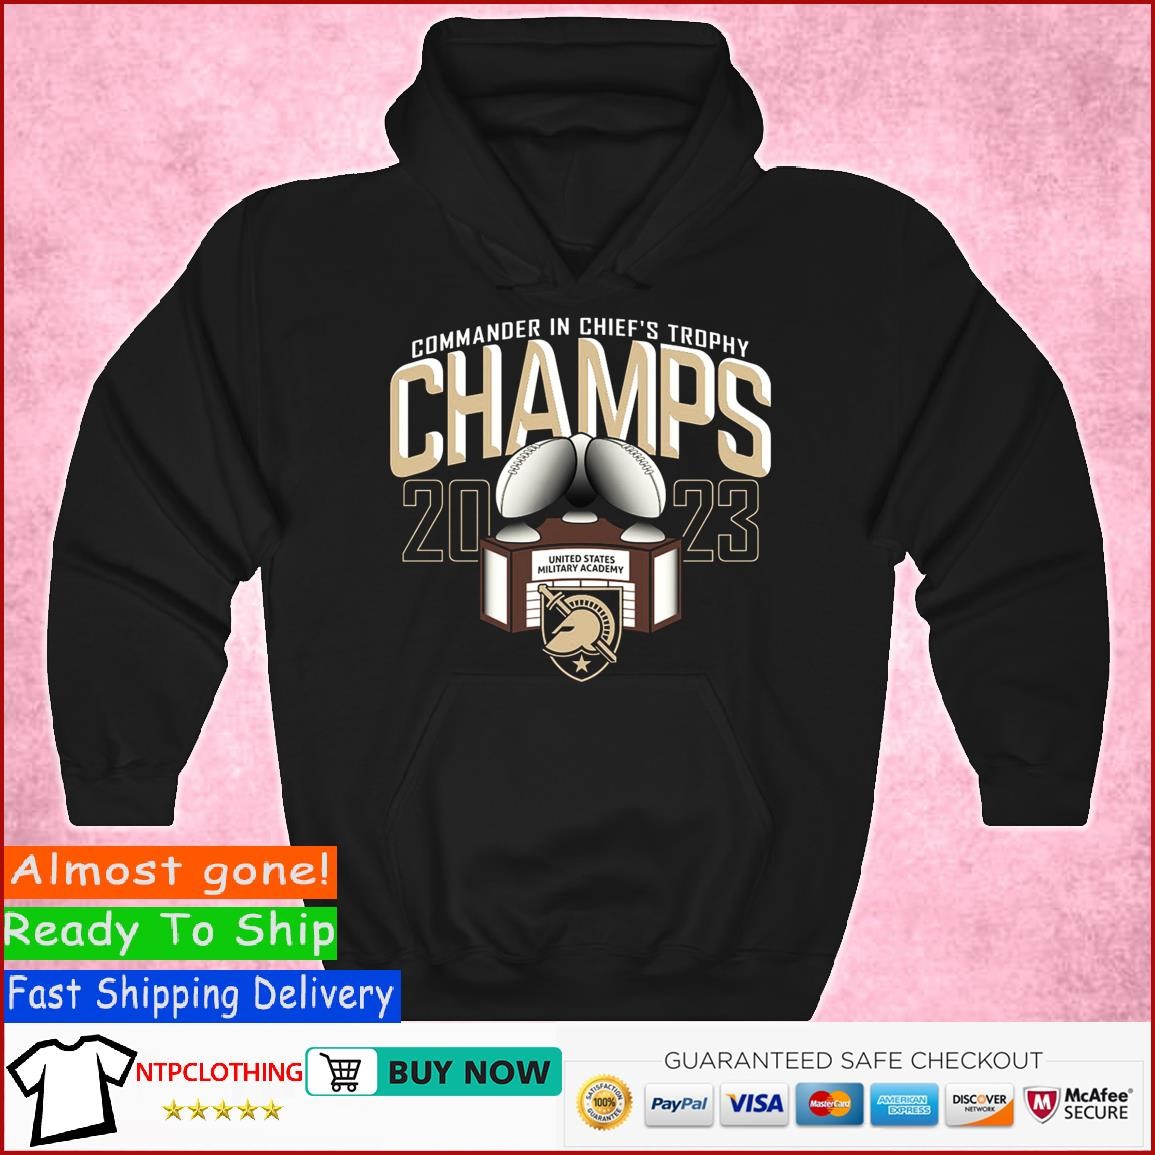 Army Black Knights Commander-in-Chief's Trophy Champs 2023 United ...